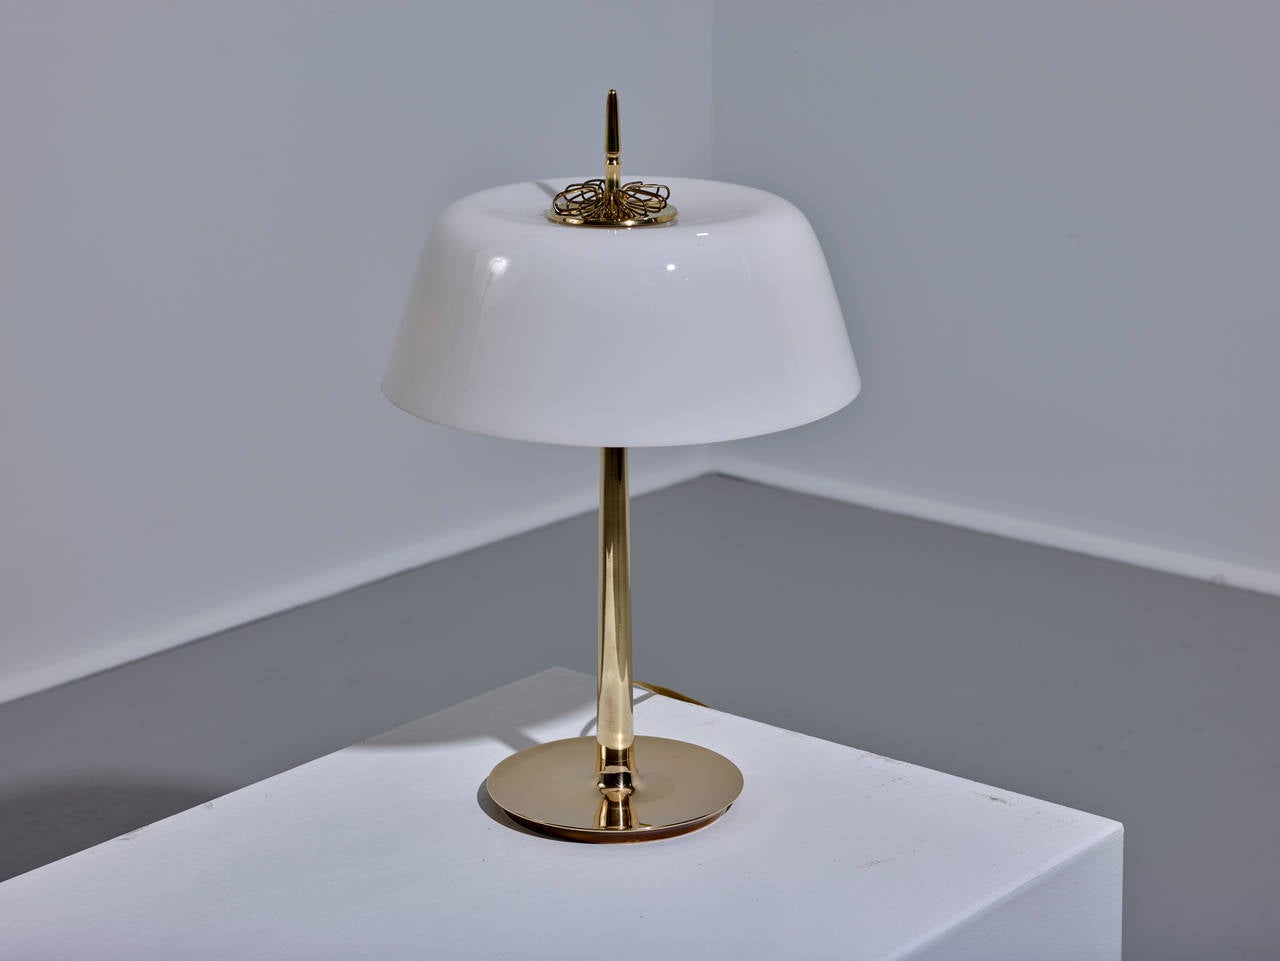 Paavo Tynell

Table lamp, model 9211

Taito OY
Finland, c. 1950
brass, glass 
14 dia x 18.25 h inches